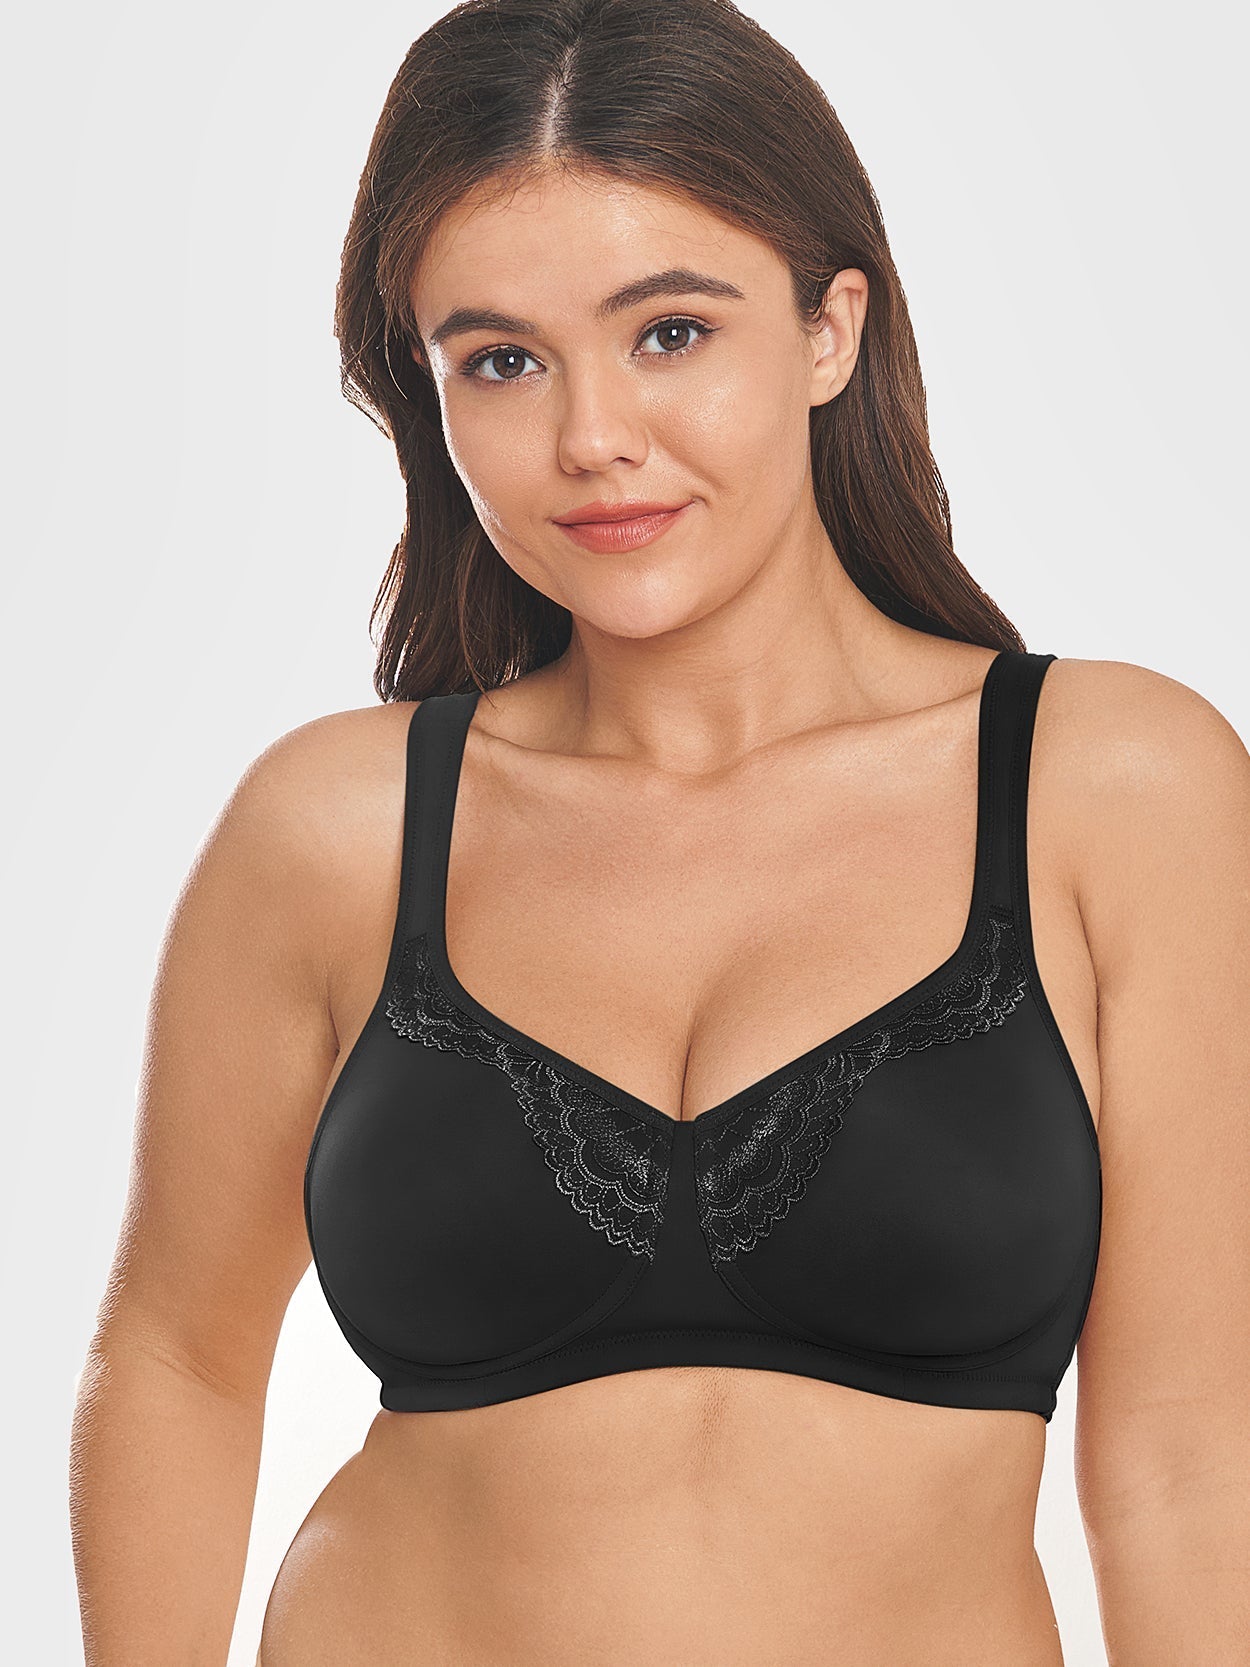 Wingslove Women's Full Cup Minimizer Bra Non Padded Non Wired